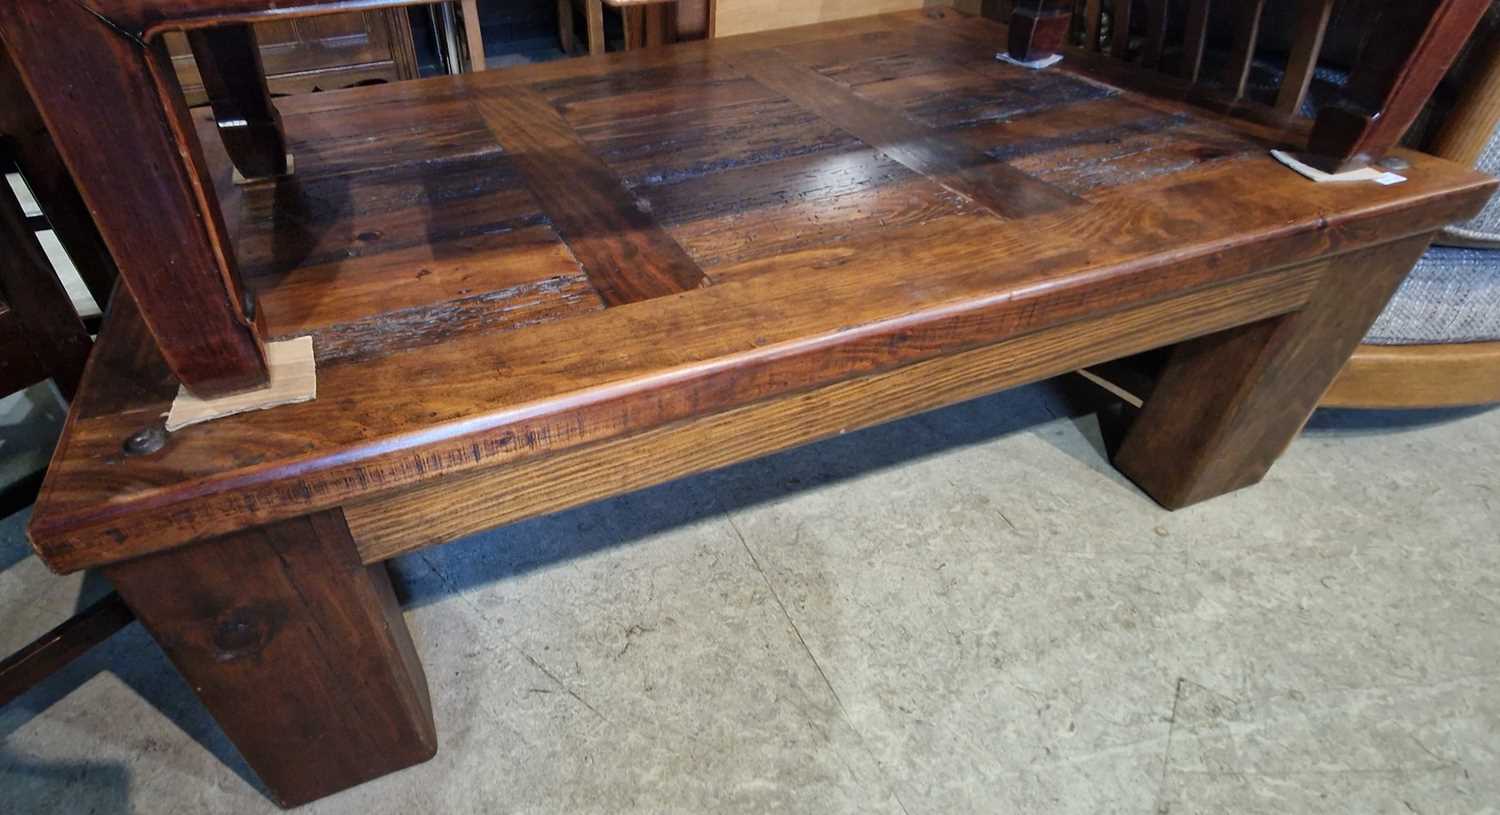 A 20th century darkwood coffee table with white metal rivet detail, 120cm wide.